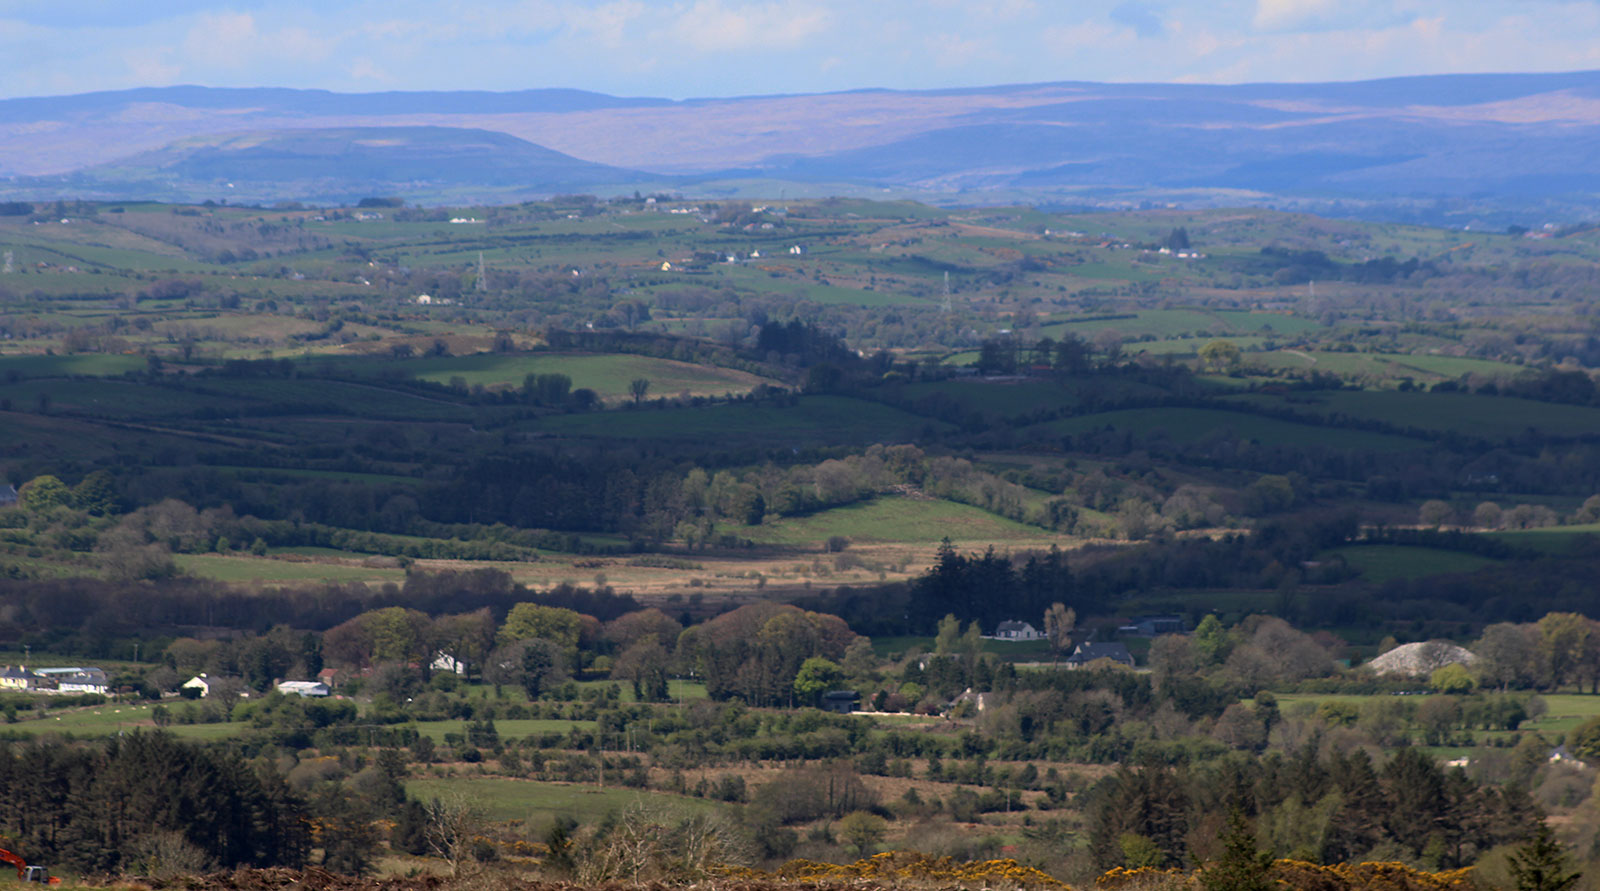 The view from Shee Lugh, the neolithic cairn on Moytura in County Sligo.